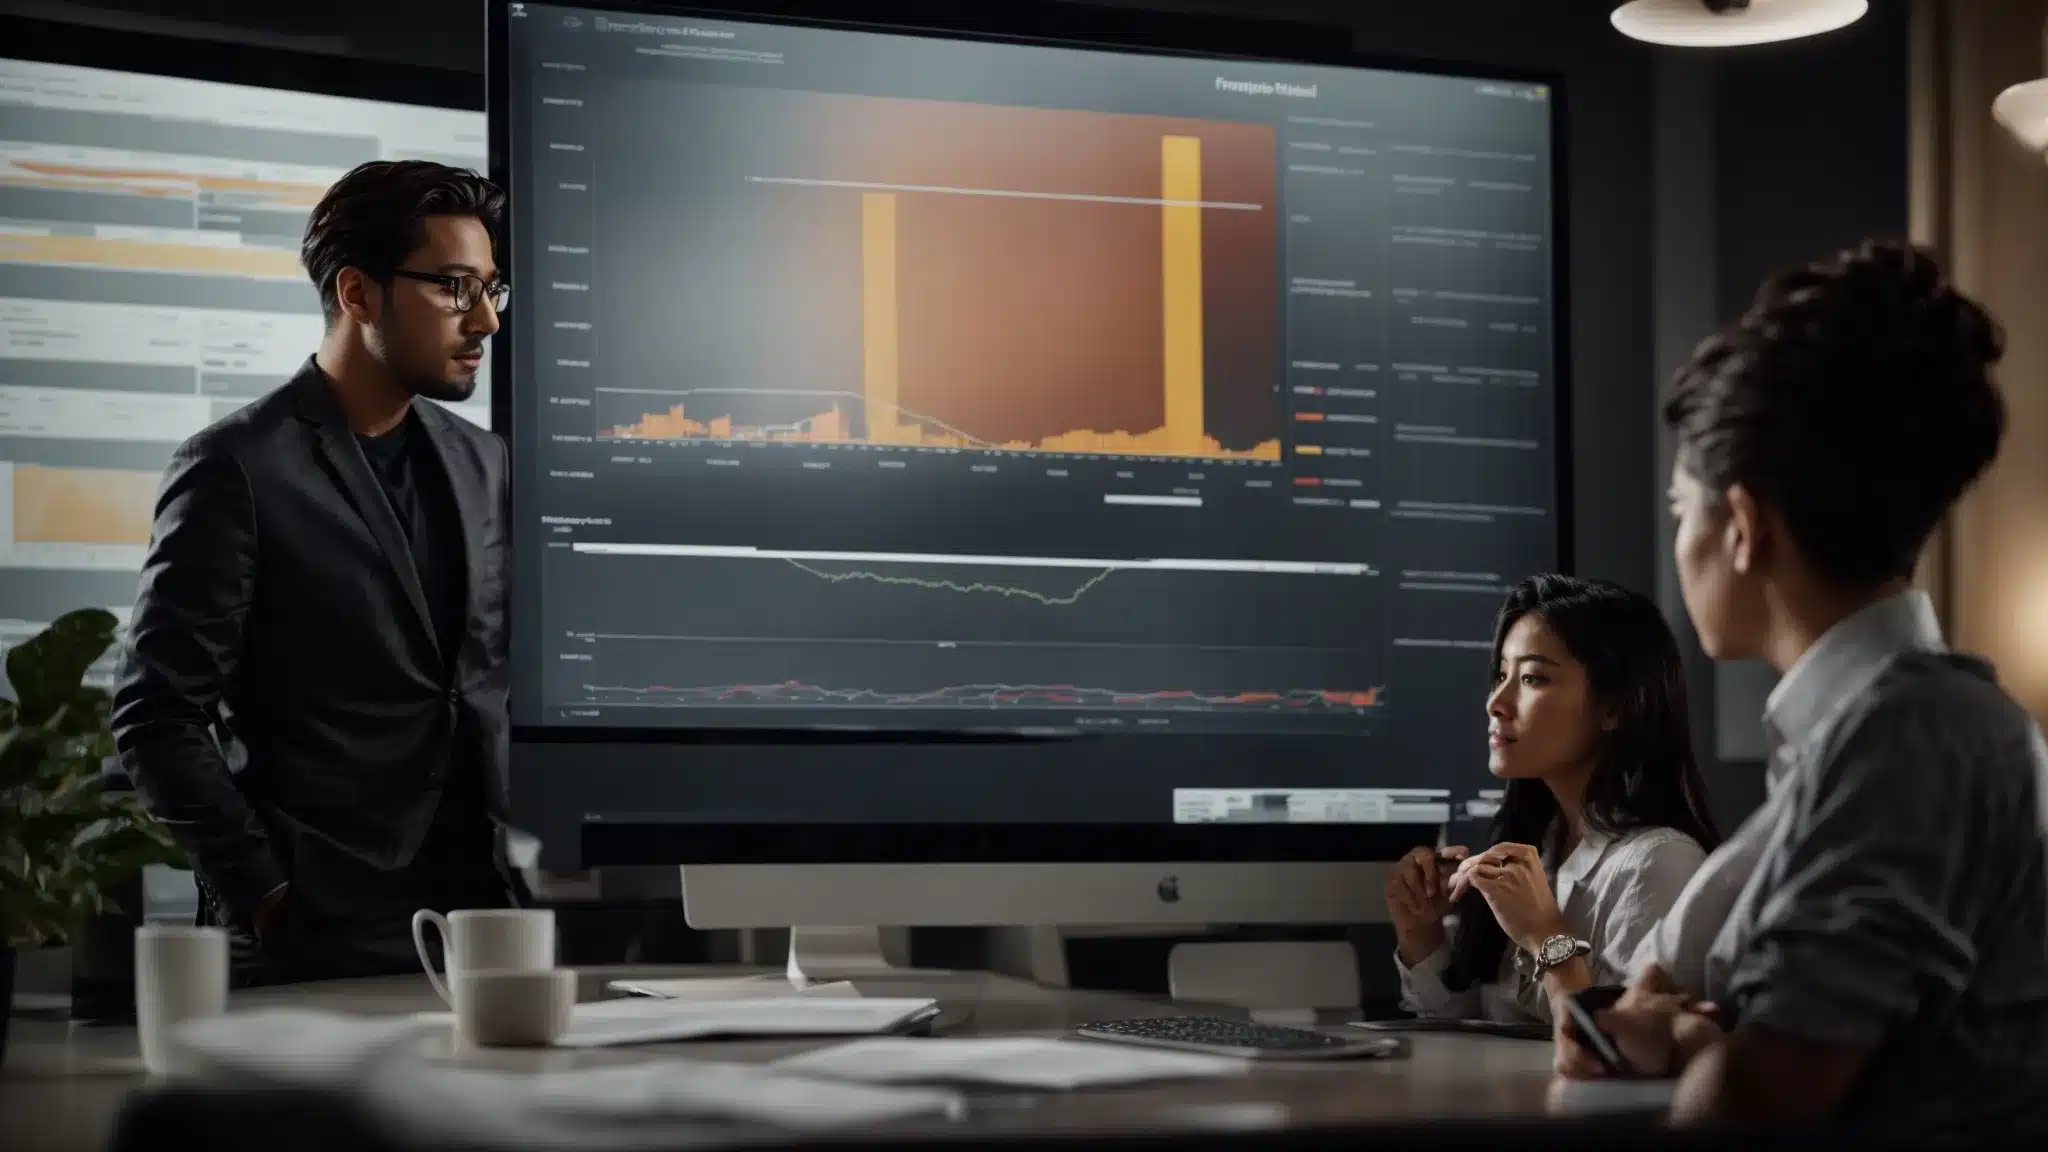 A Marketing Team Discussing Over A Computer Screen Showing Graphs Of Advertising Campaign Metrics.